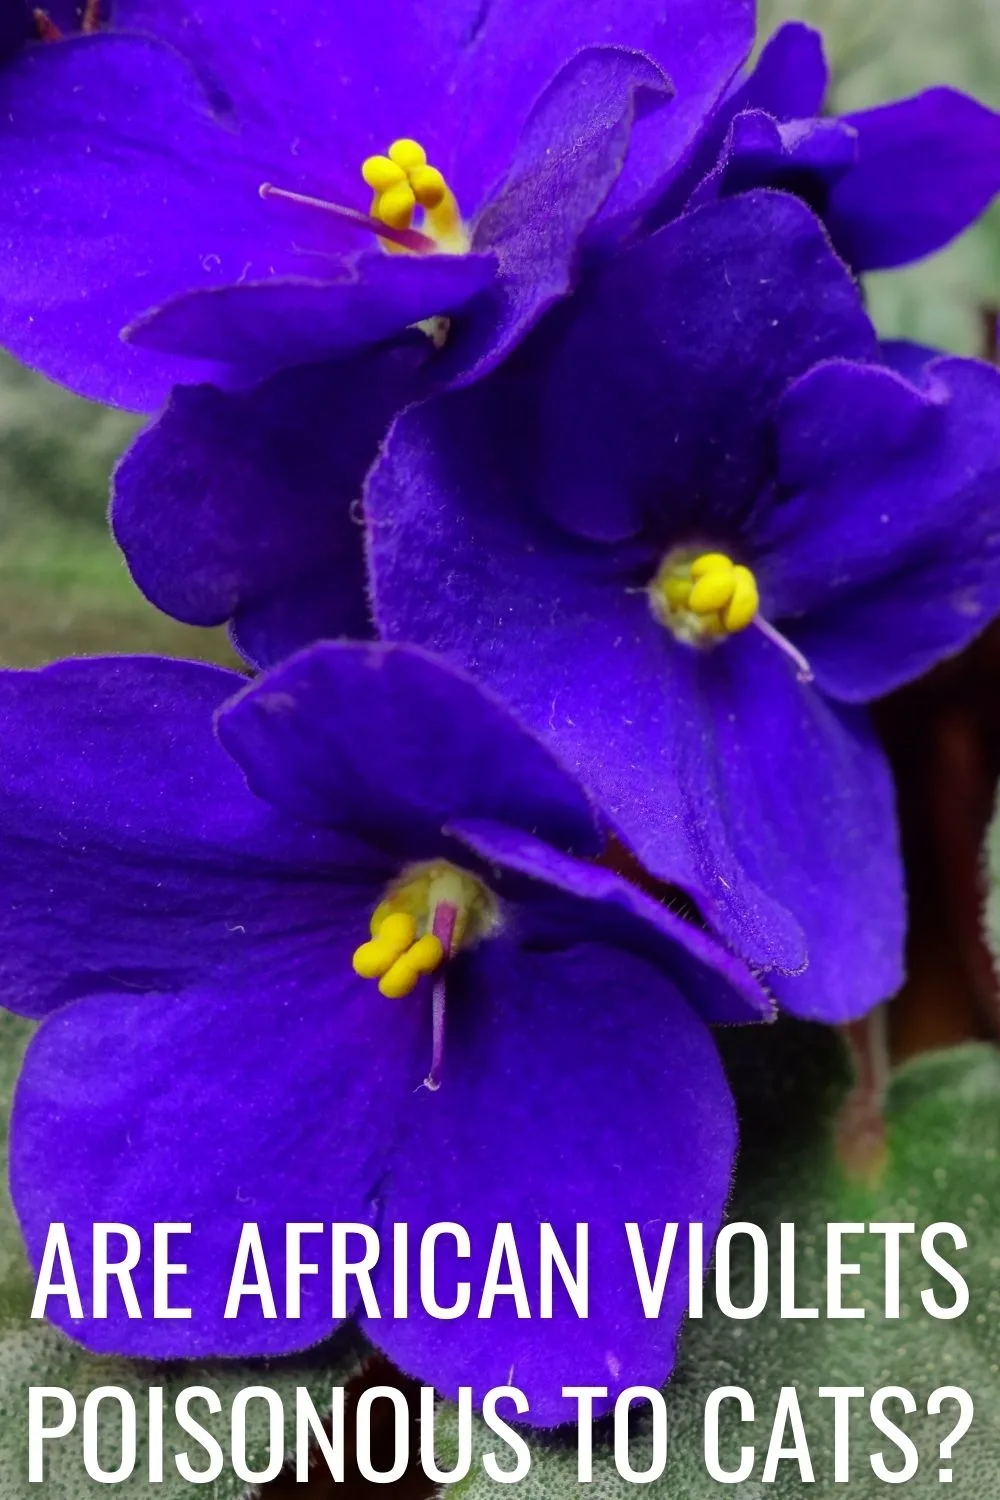 Are African violets poisonous to cats